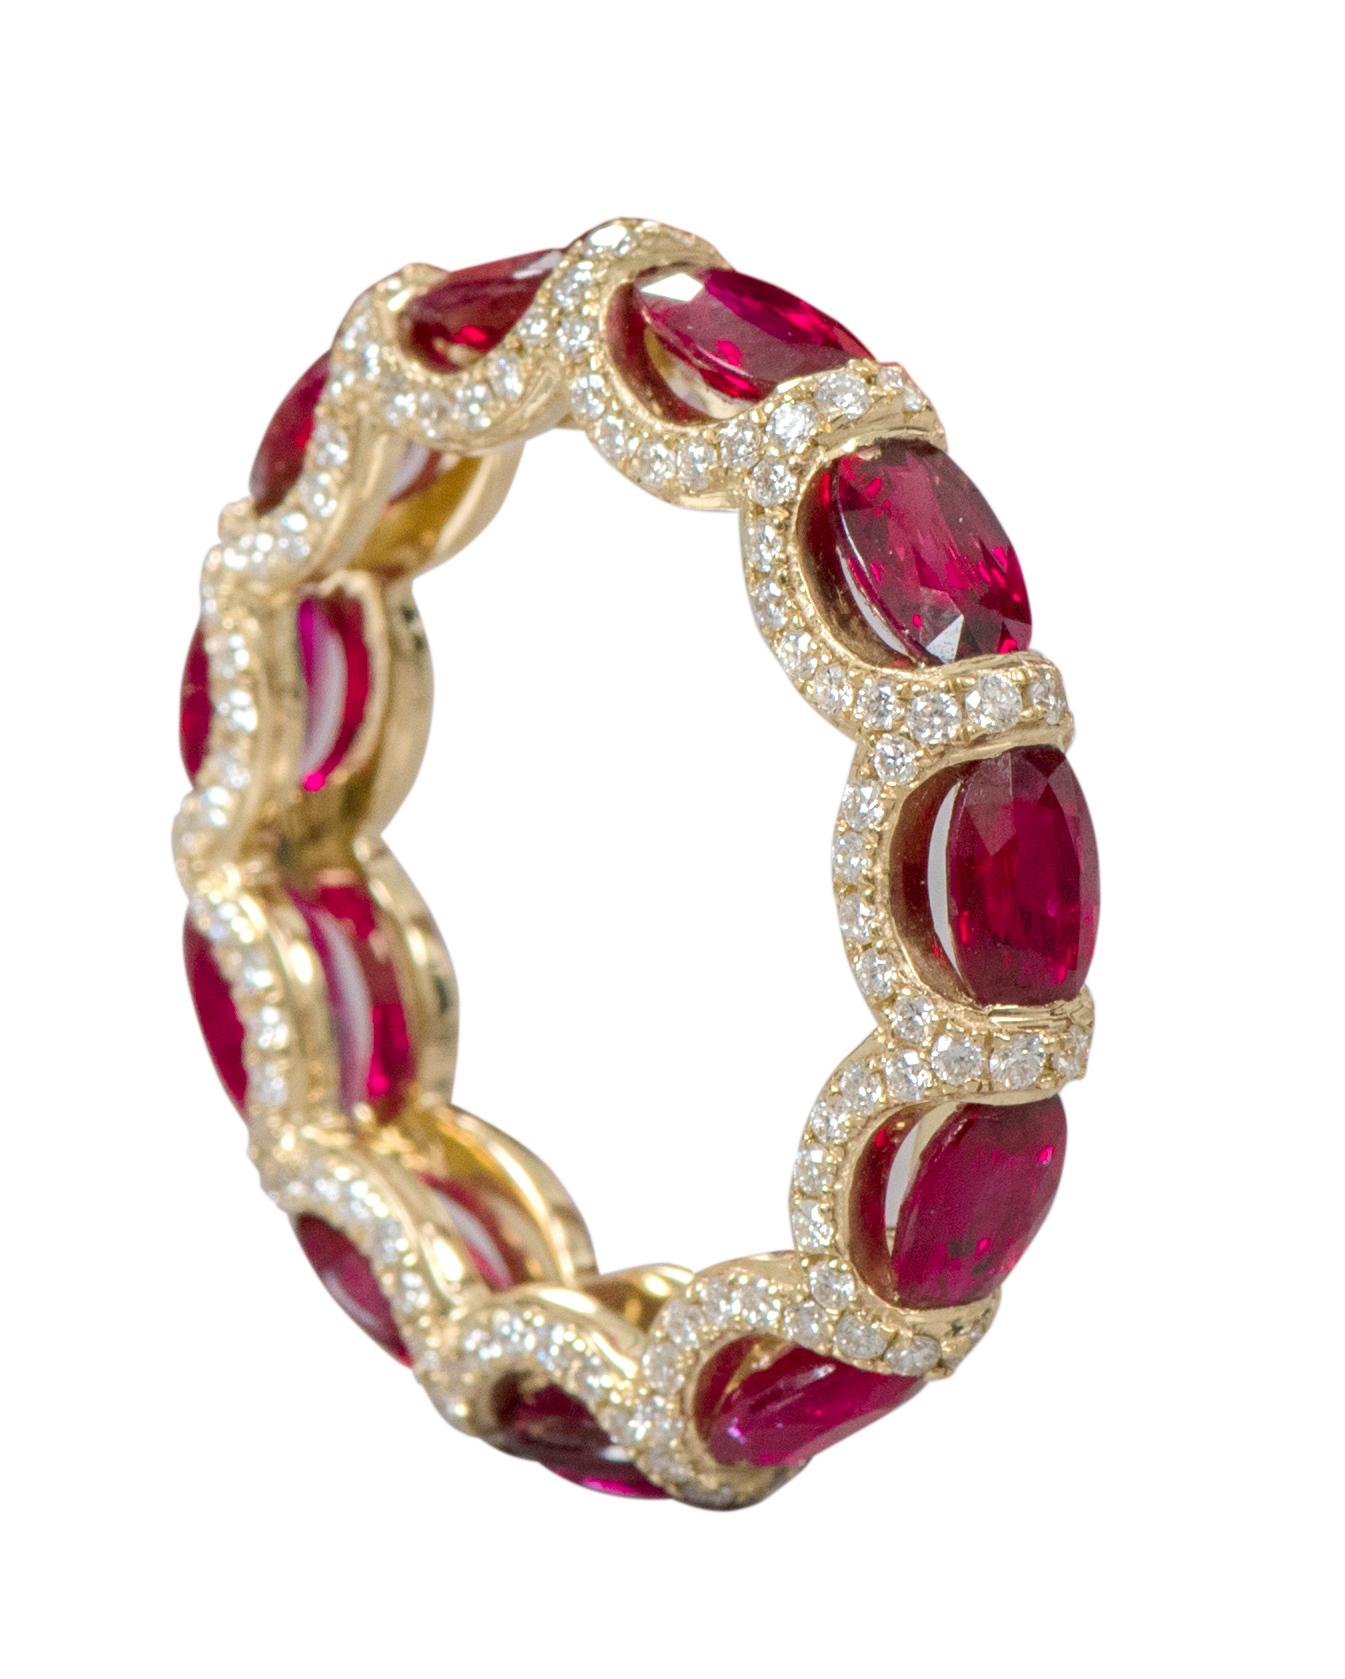 18 Karat Yellow Gold 6.40 Carat Ruby and Diamond Eternity Band Ring 

This glorious fiery red ruby and diamond band is phenomenal. The solitaire horizontally placed oval shape rubies are brilliantly enclosed in between pave set round diamonds